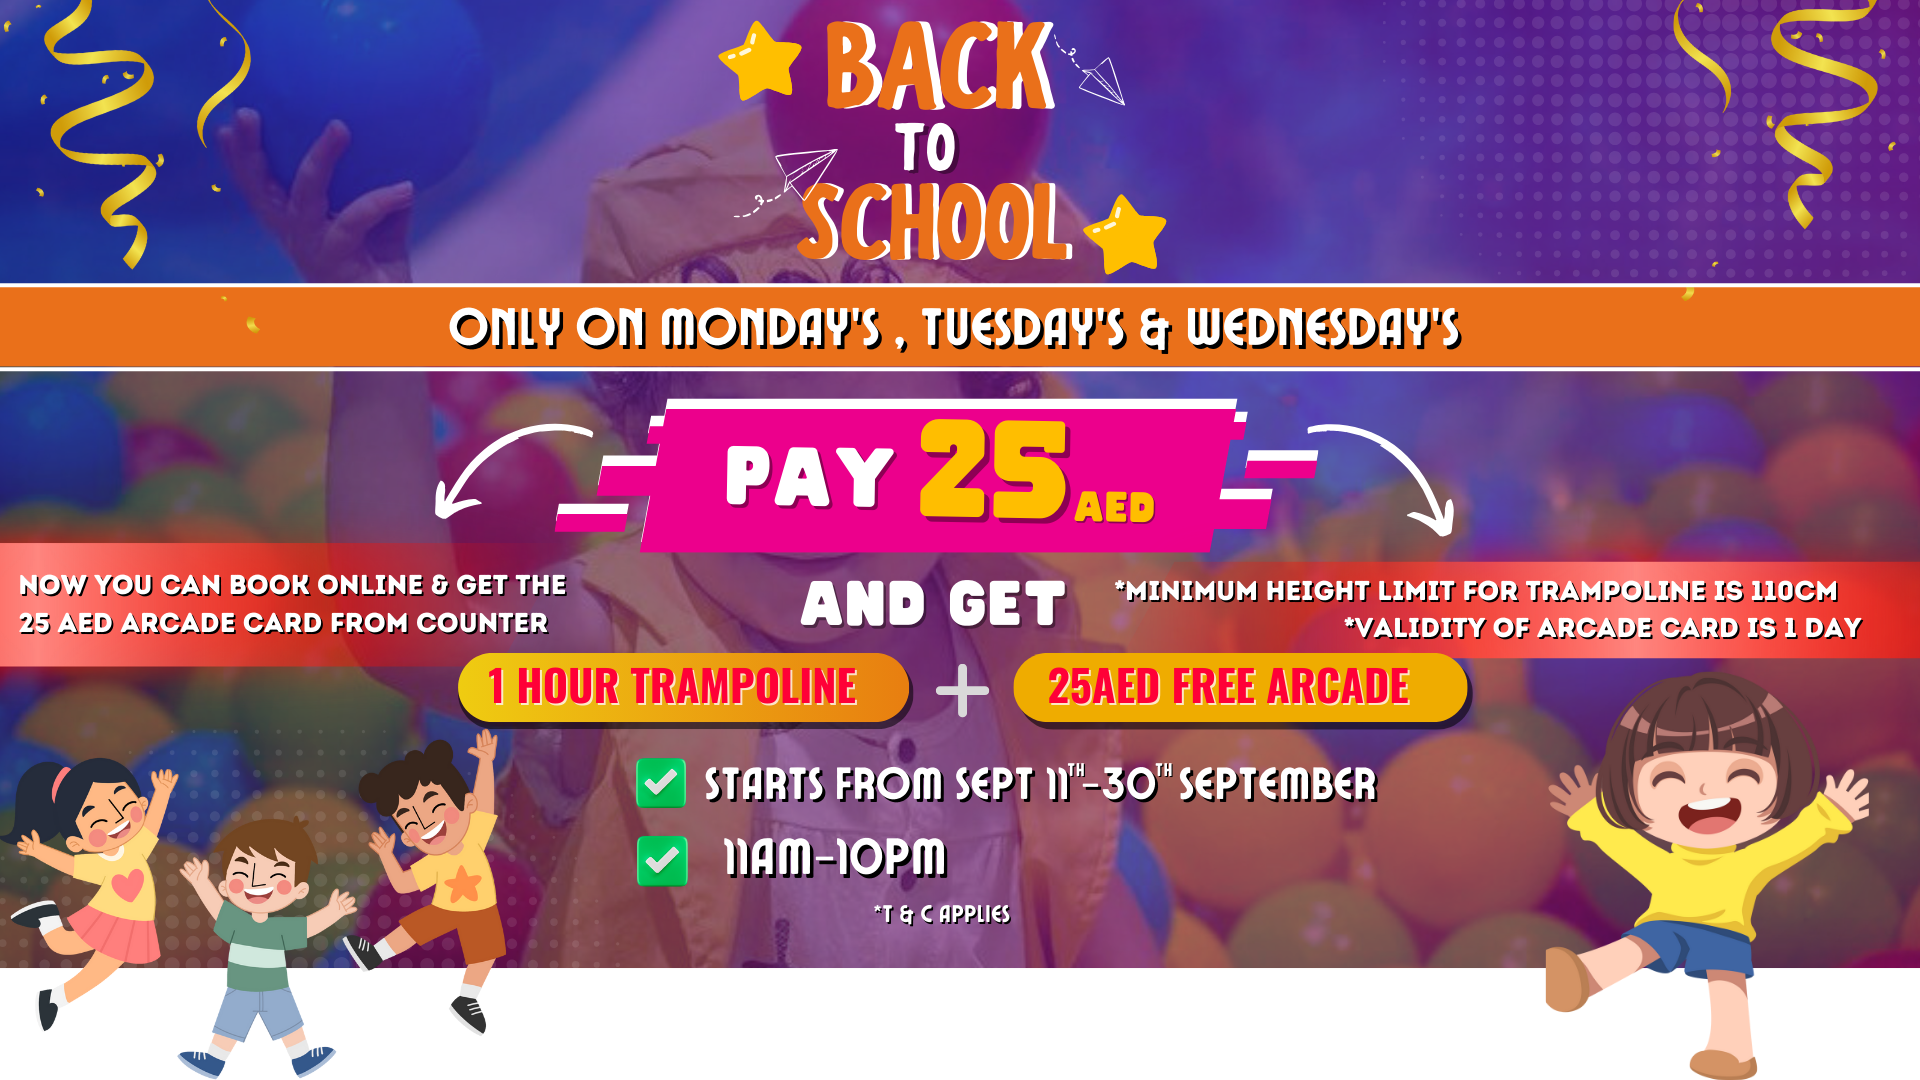 Back to School Offer